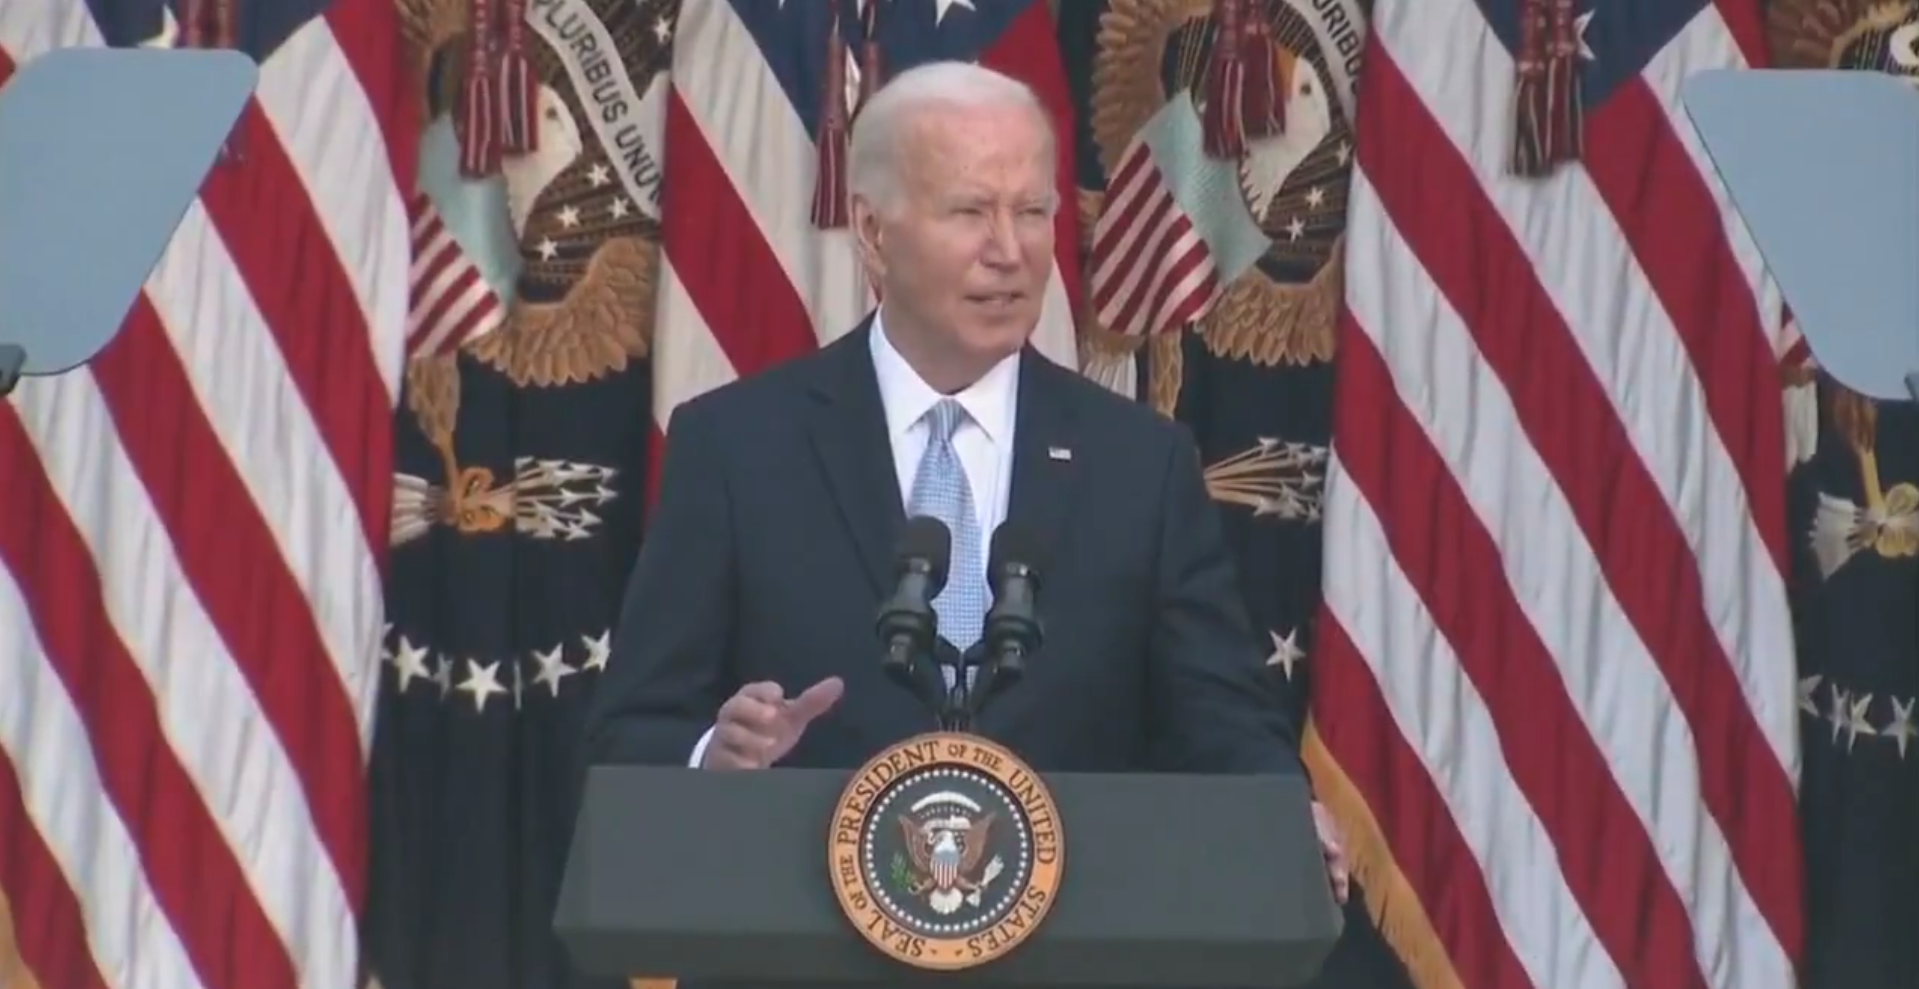 Biden Corrects Himself After Mistakenly Saying American Held by Hamas Is ‘Here With Us Today’